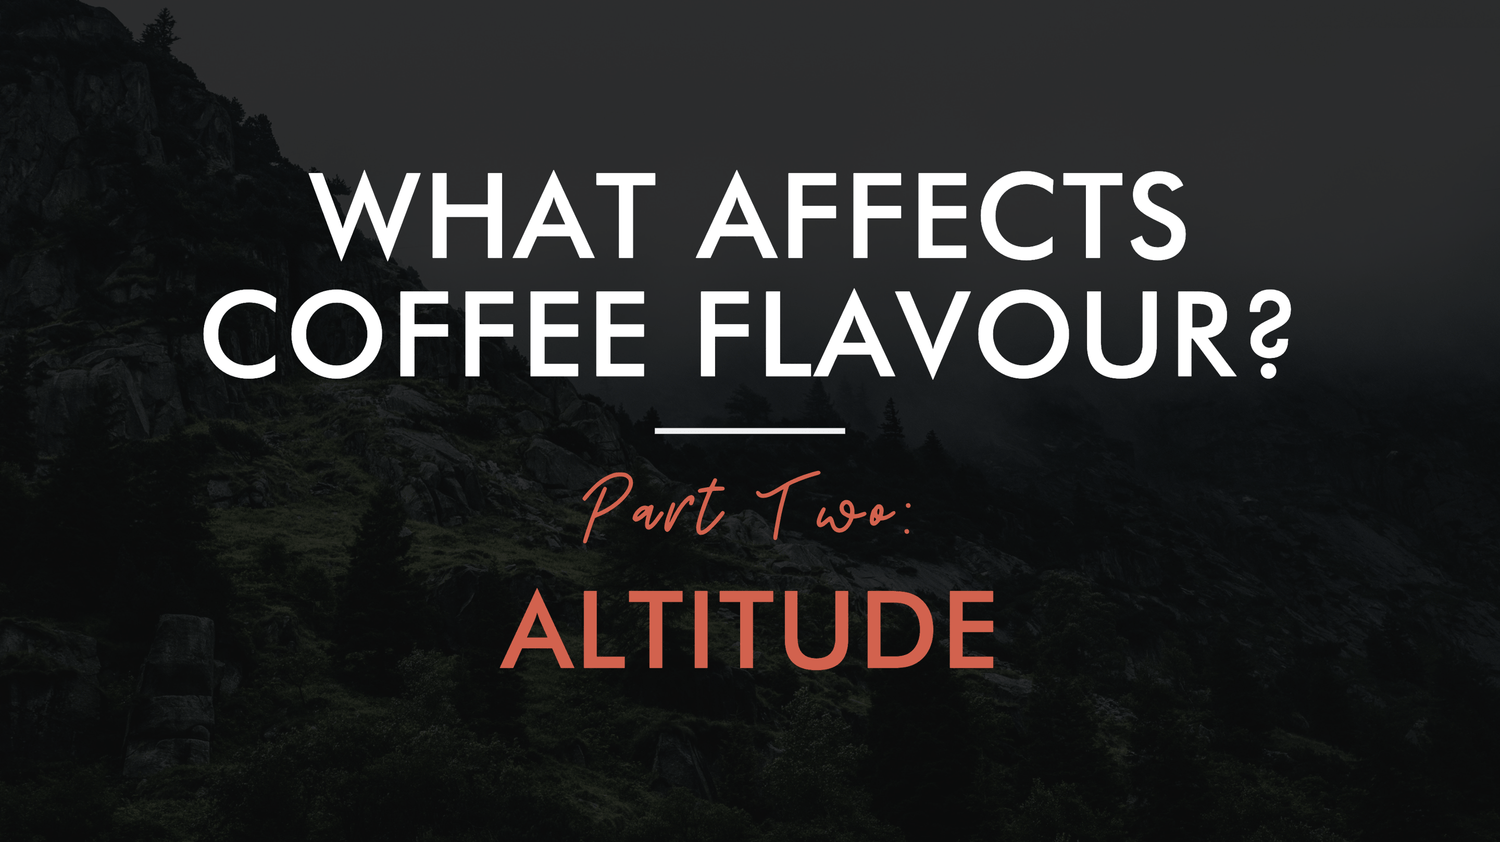 What Affects Coffee Flavour Part 2: Altitude